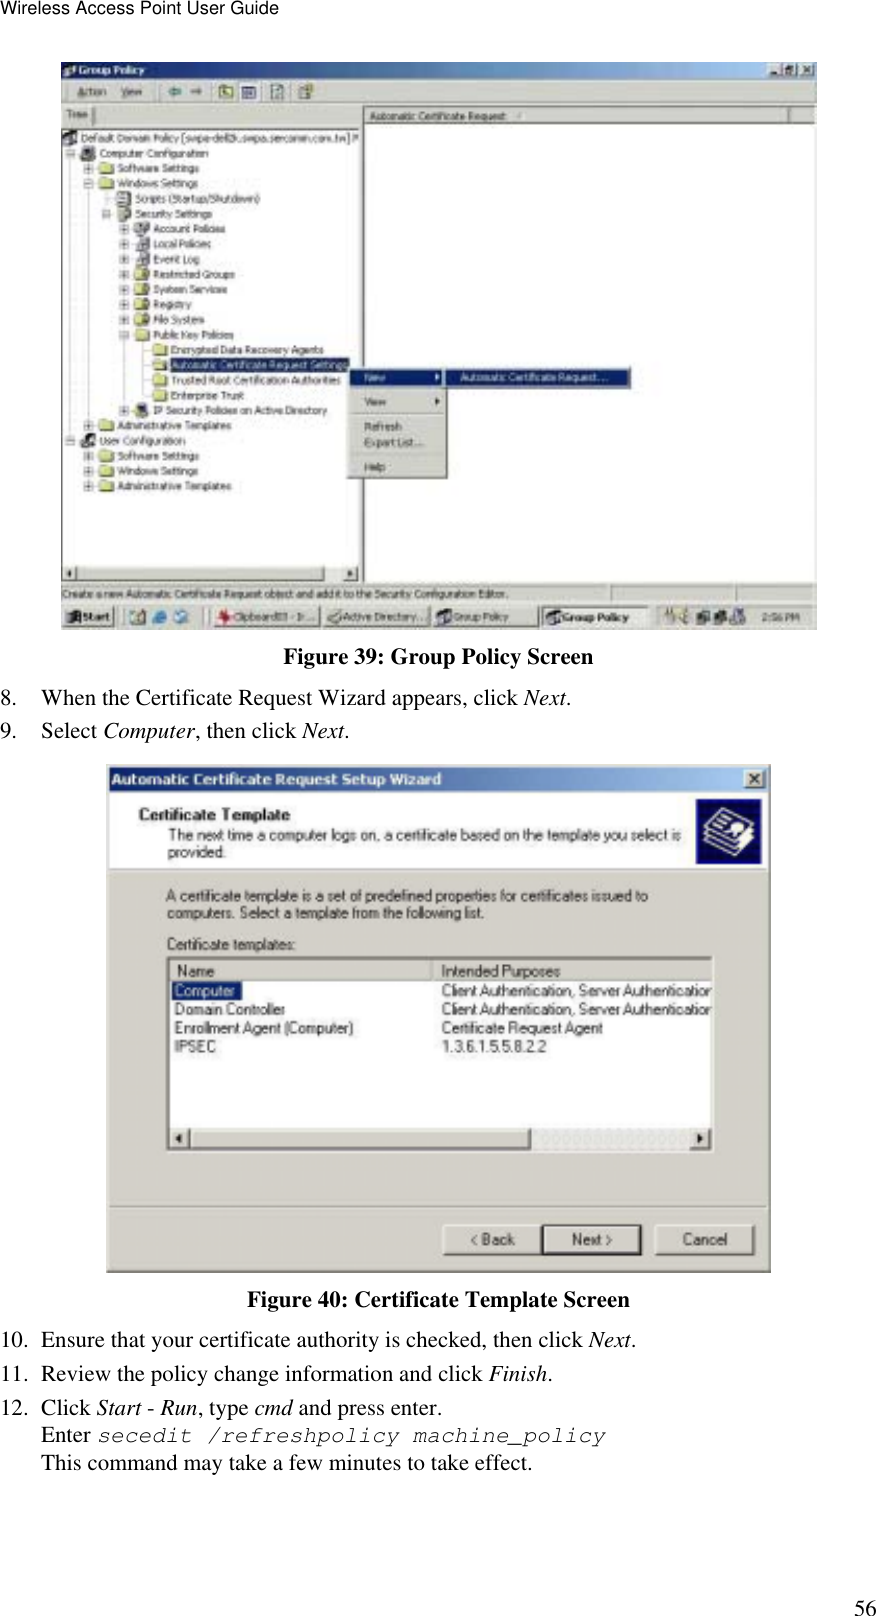 Wireless Access Point User Guide 56  Figure 39: Group Policy Screen 8.  When the Certificate Request Wizard appears, click Next.  9. Select Computer, then click Next.  Figure 40: Certificate Template Screen 10.  Ensure that your certificate authority is checked, then click Next.  11.  Review the policy change information and click Finish.  12. Click Start - Run, type cmd and press enter.  Enter secedit /refreshpolicy machine_policy This command may take a few minutes to take effect.  